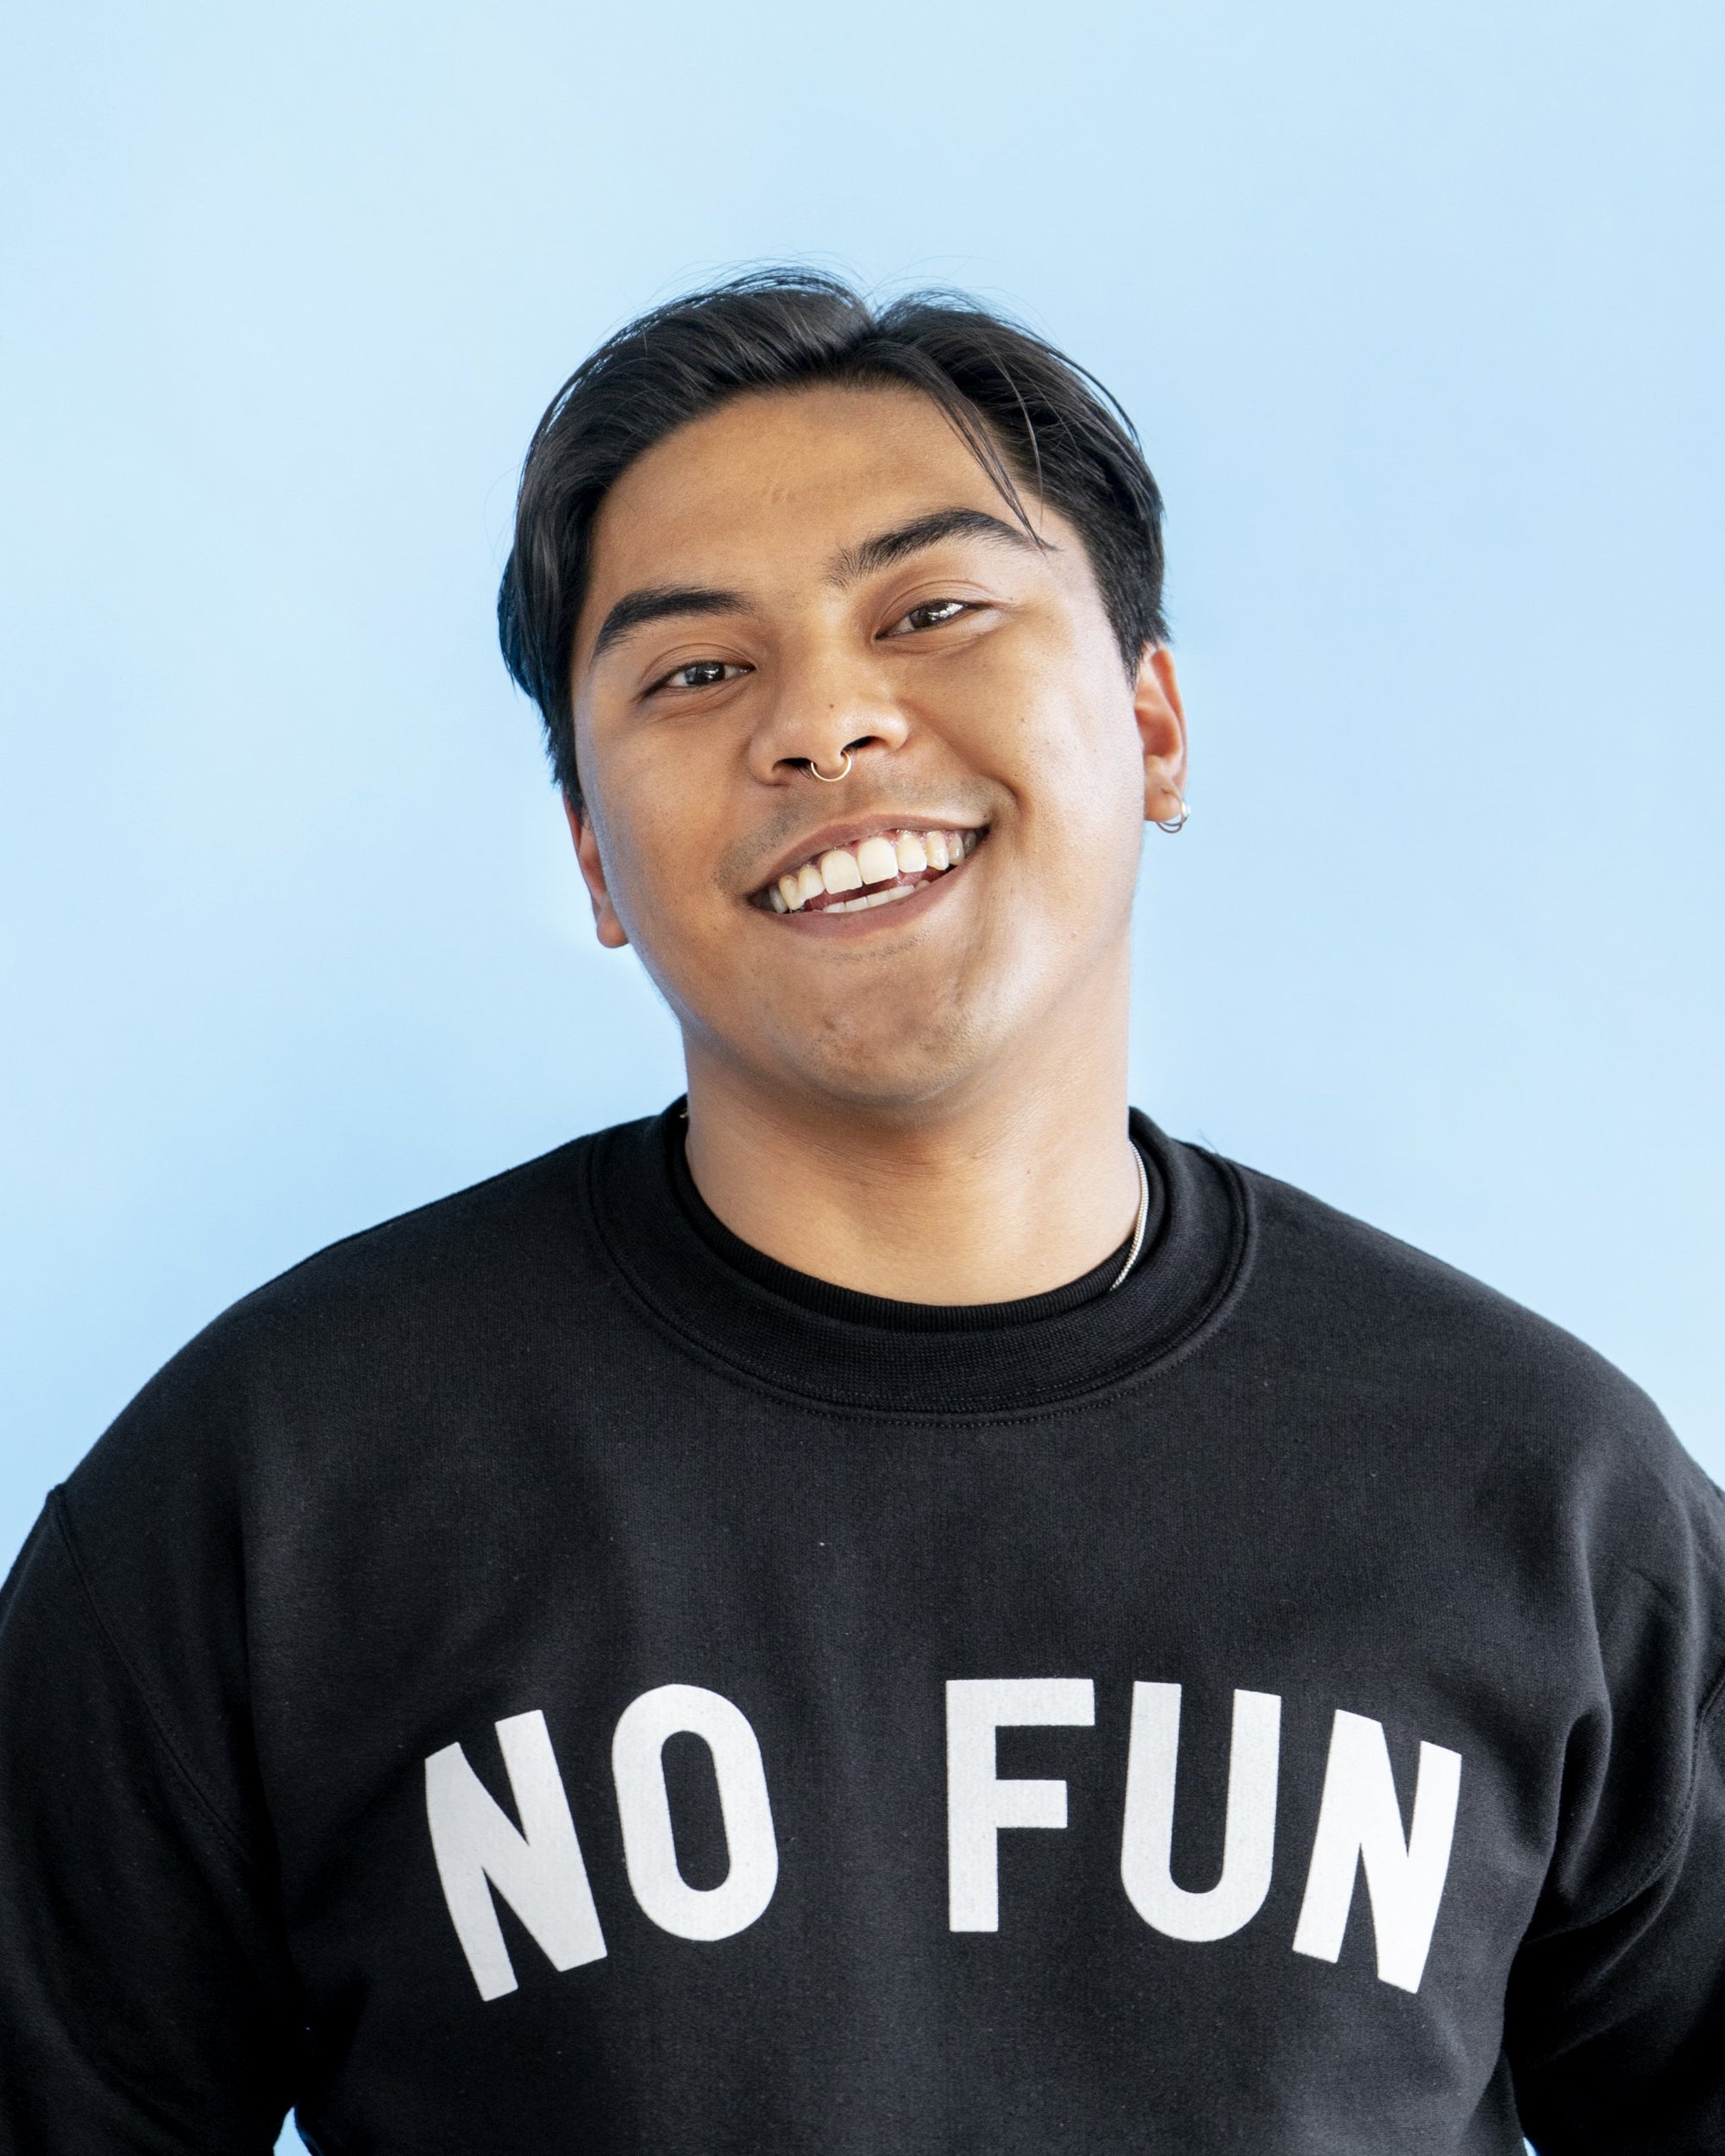 A male model wearing the original "NO FUN®" logo crewneck sweater. The sweater is black and features large white text that reads "NO FUN®".